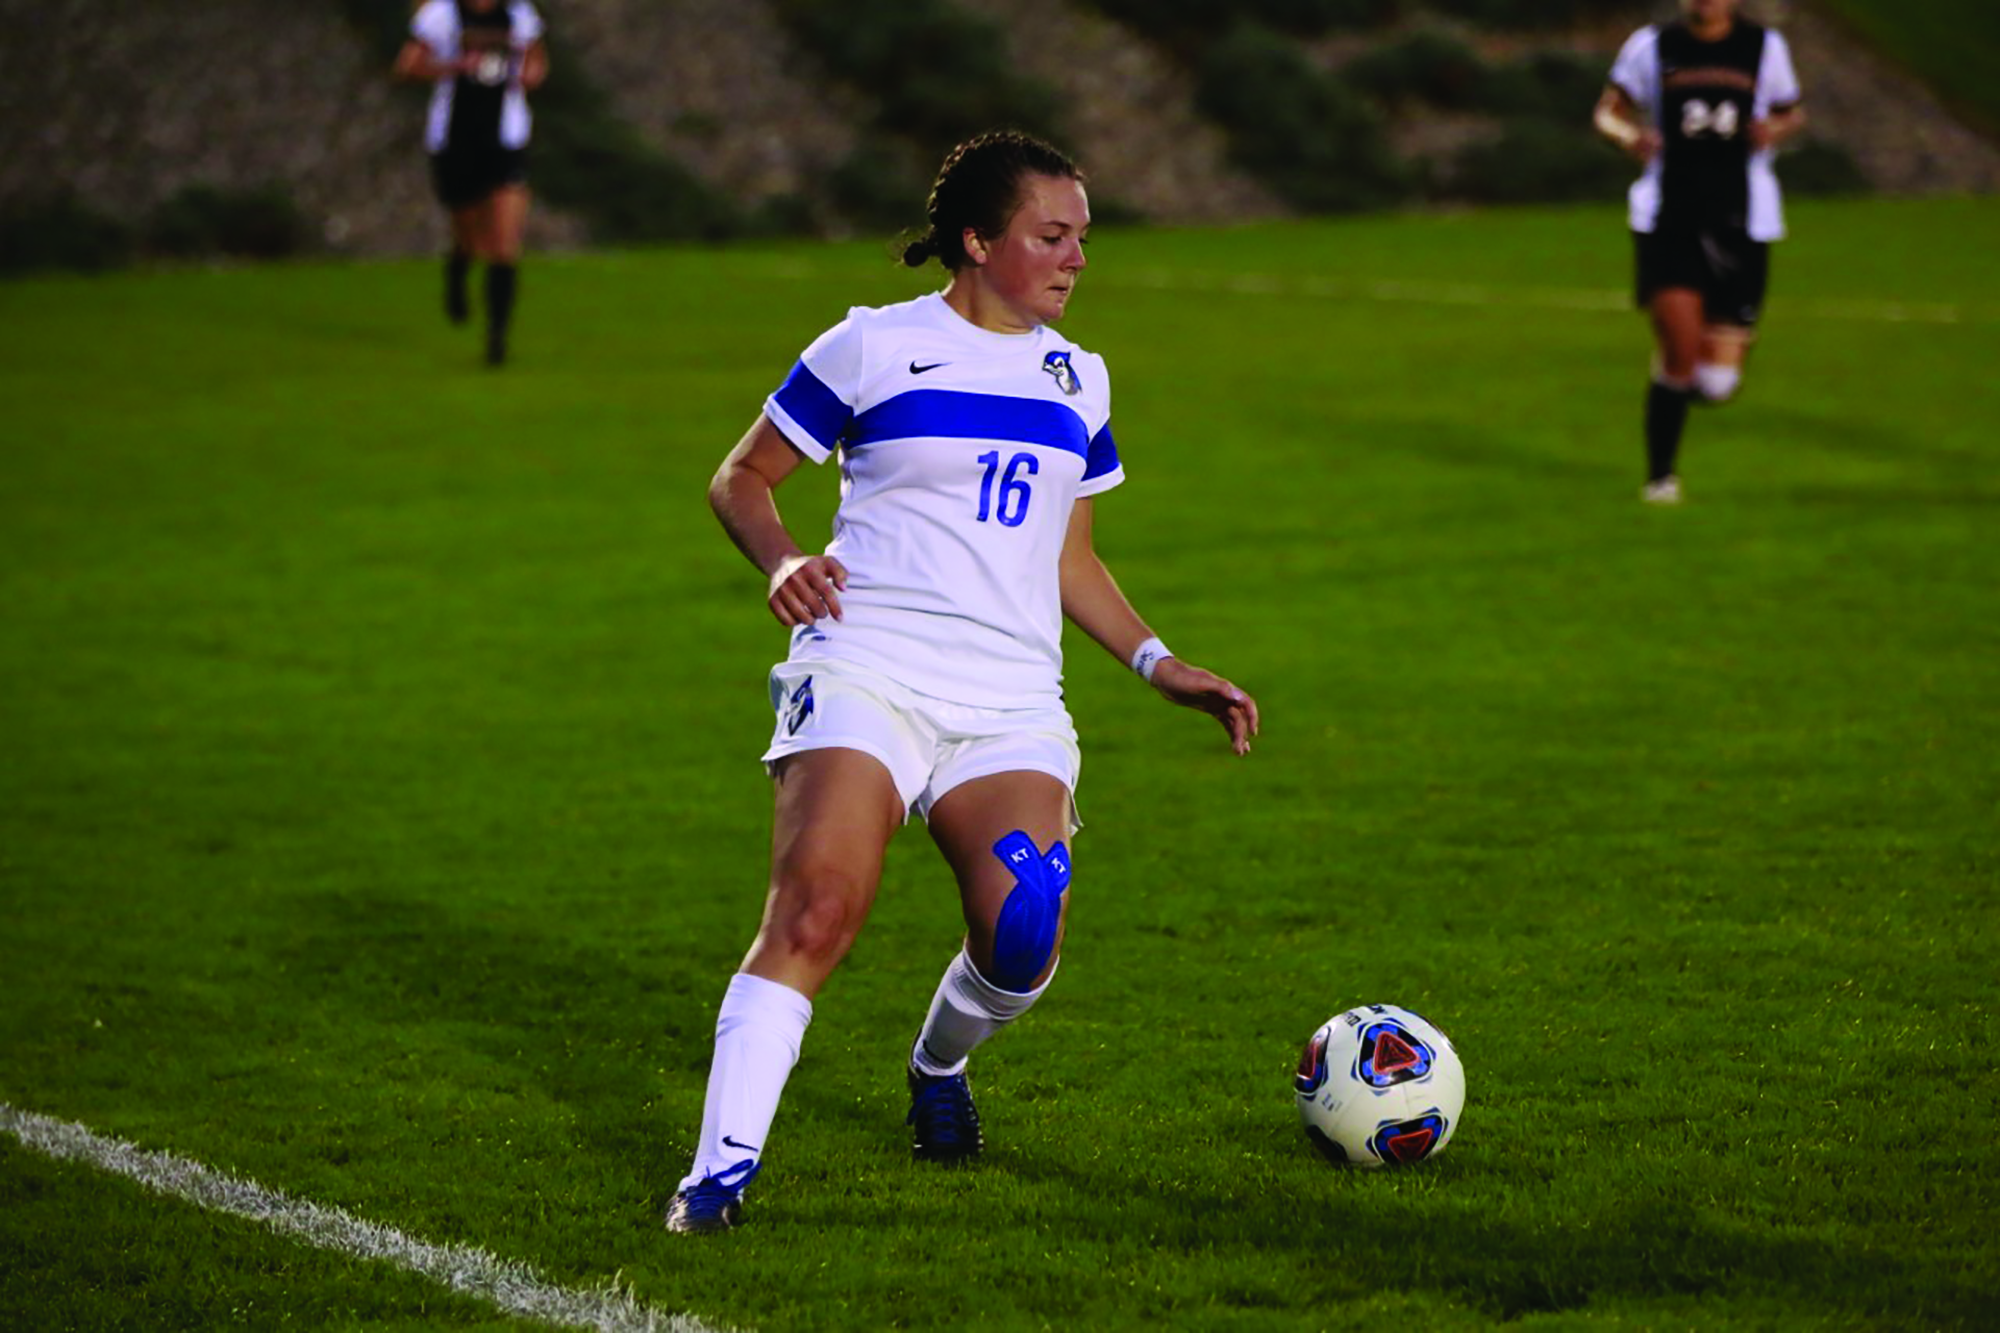 Women’s soccer game ends scoreless after double overtime